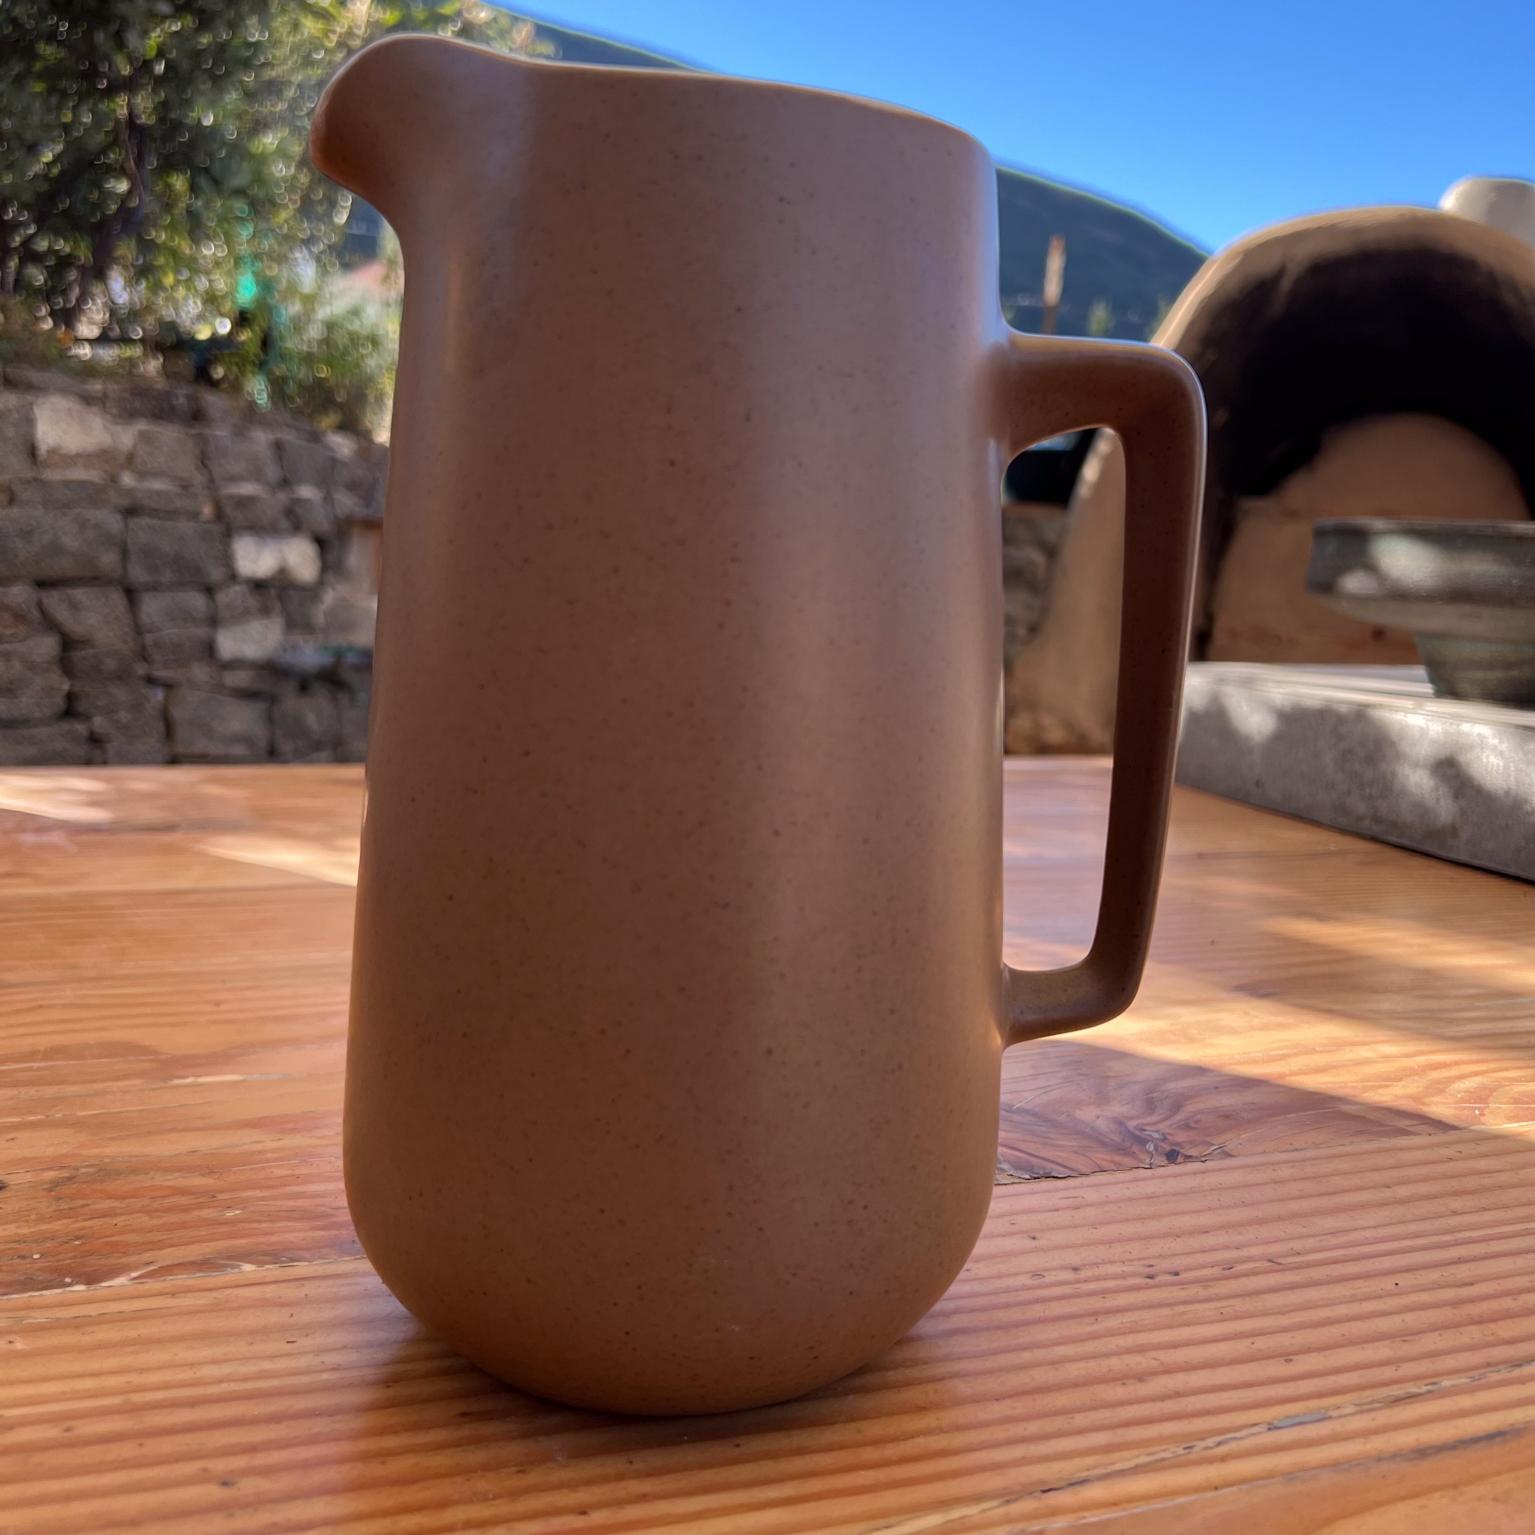 California Ceramic Stoneware Pottery Pitcher Two-Tone Metlox
Manhattan Beach Ca
Taupe and creme
approximately 9.5 inches 
Preowned original vintage condition.
Refer to images.

